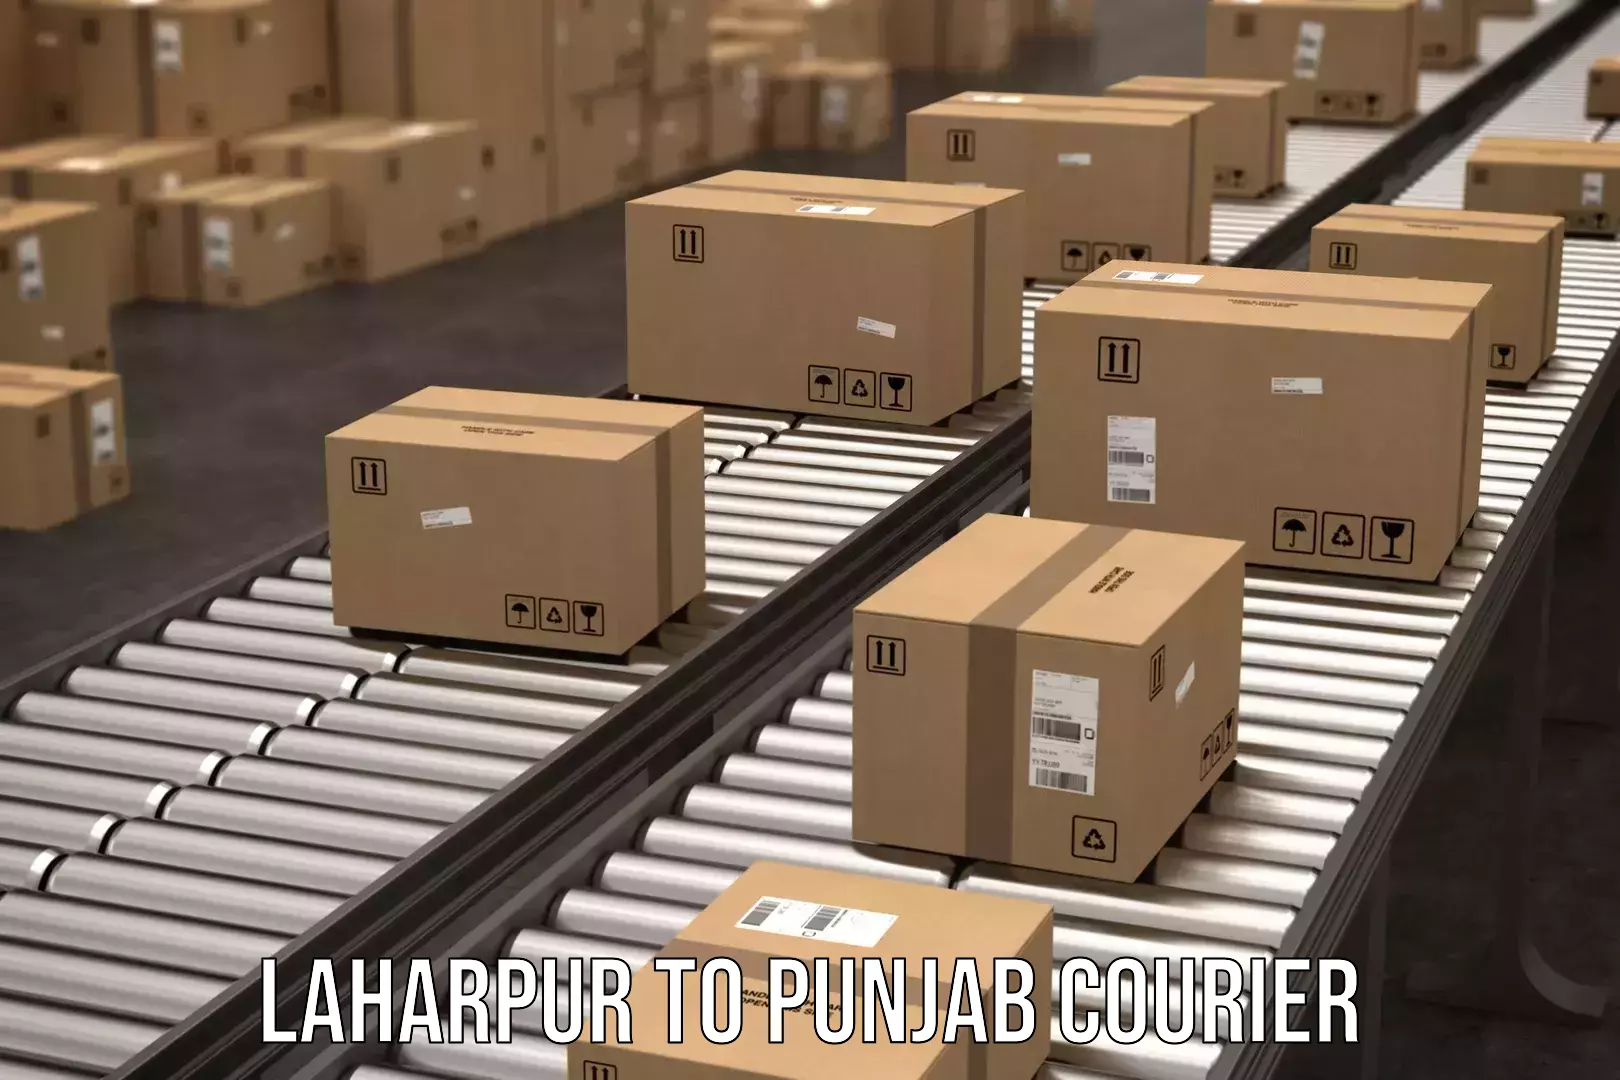 Sustainable shipping practices Laharpur to Amritsar